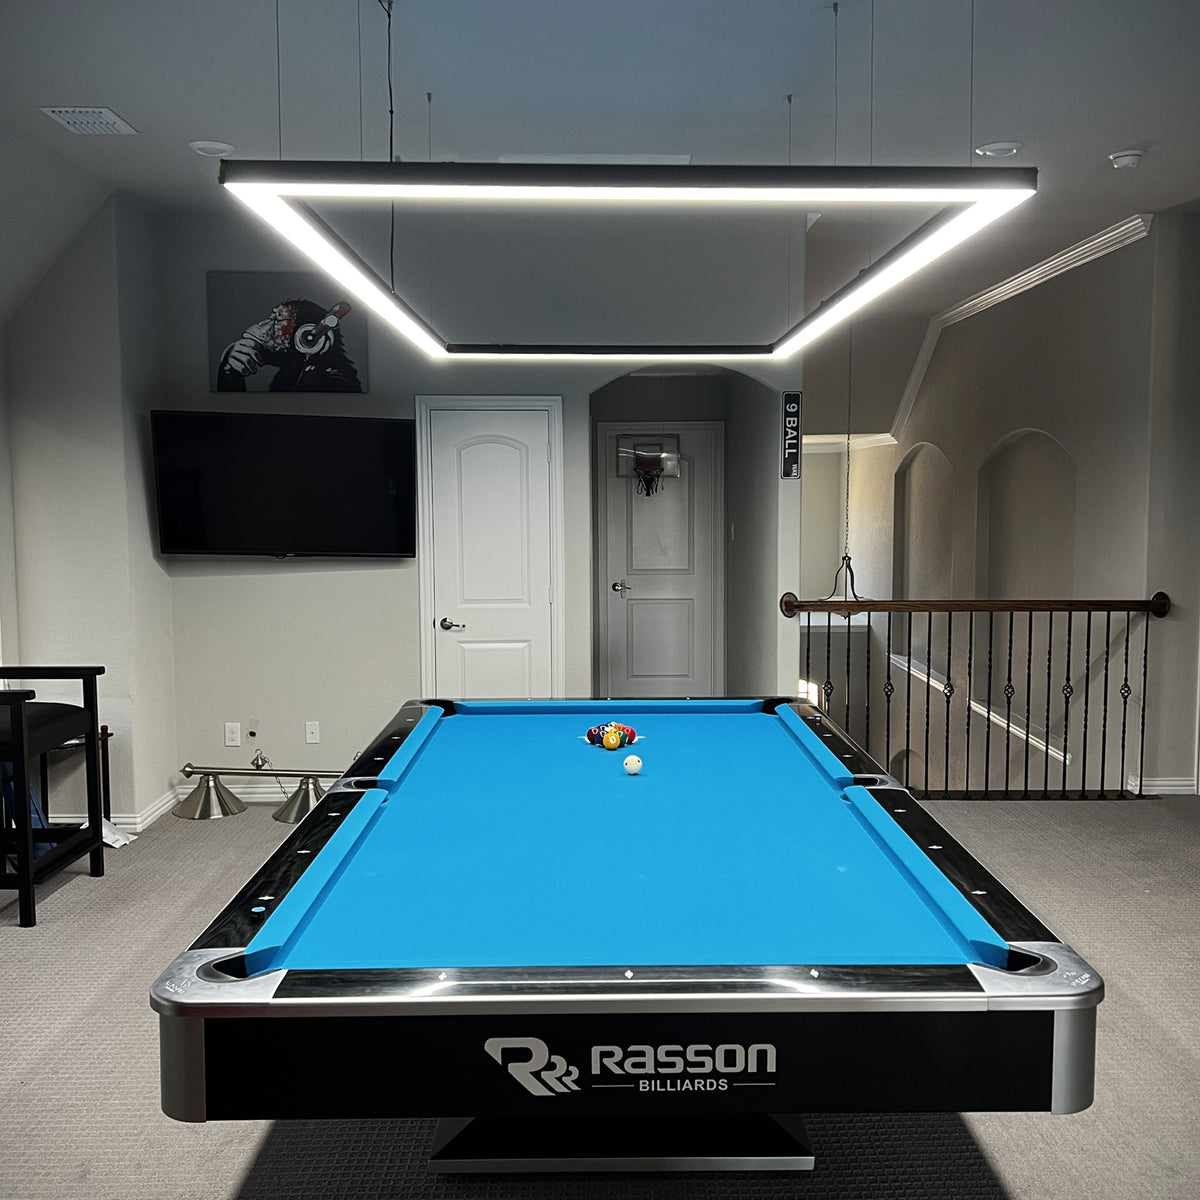 LED pool table and light in residential living room